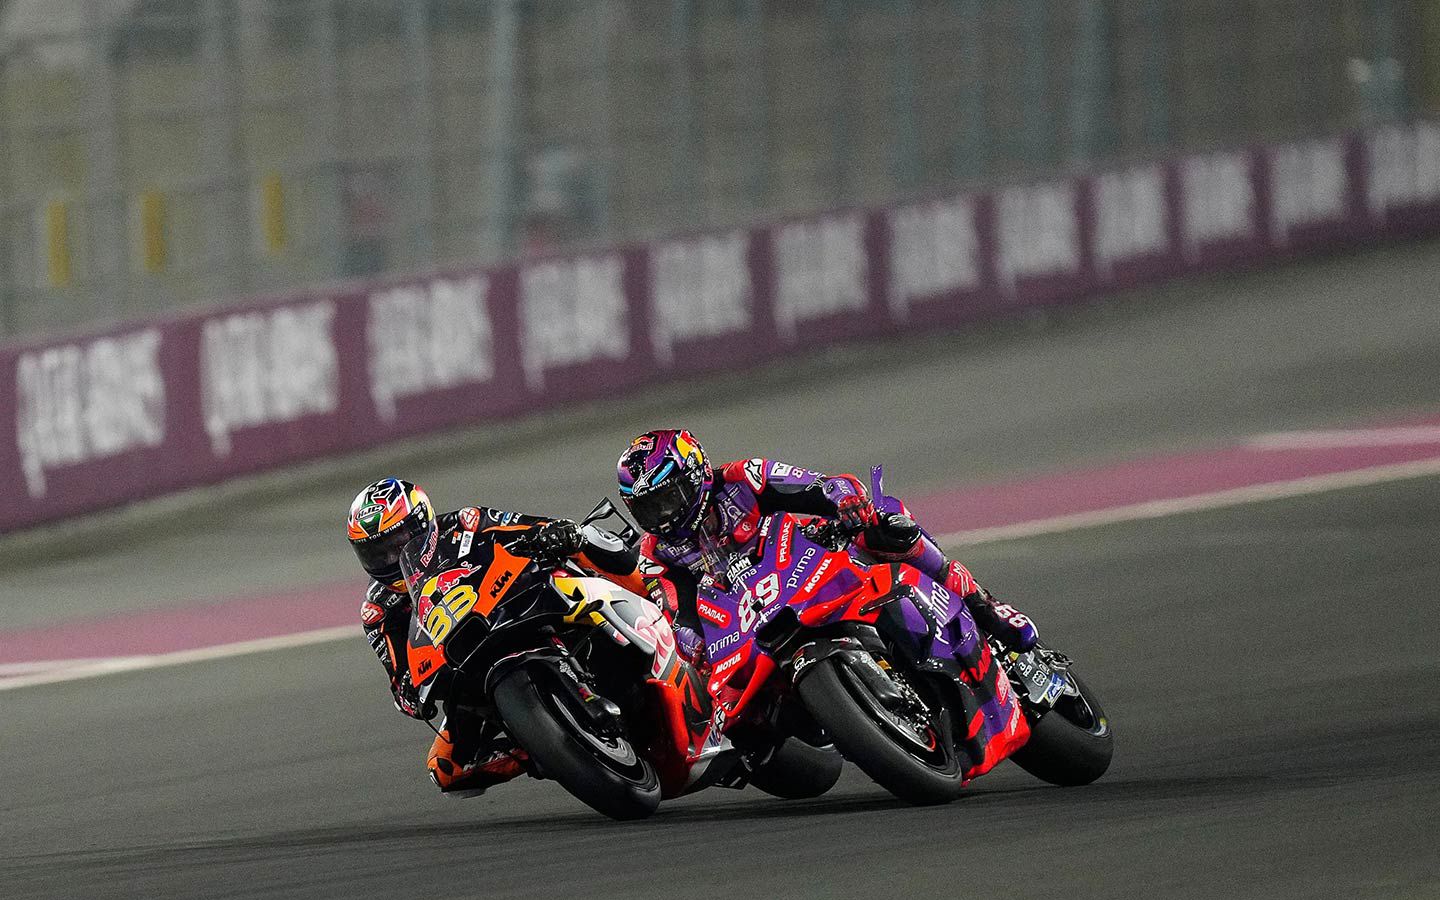 Brad Binder and Jorge Martín rounded out the podium in second and third, respectively. Martín won Saturday’s sprint race and set the track record.